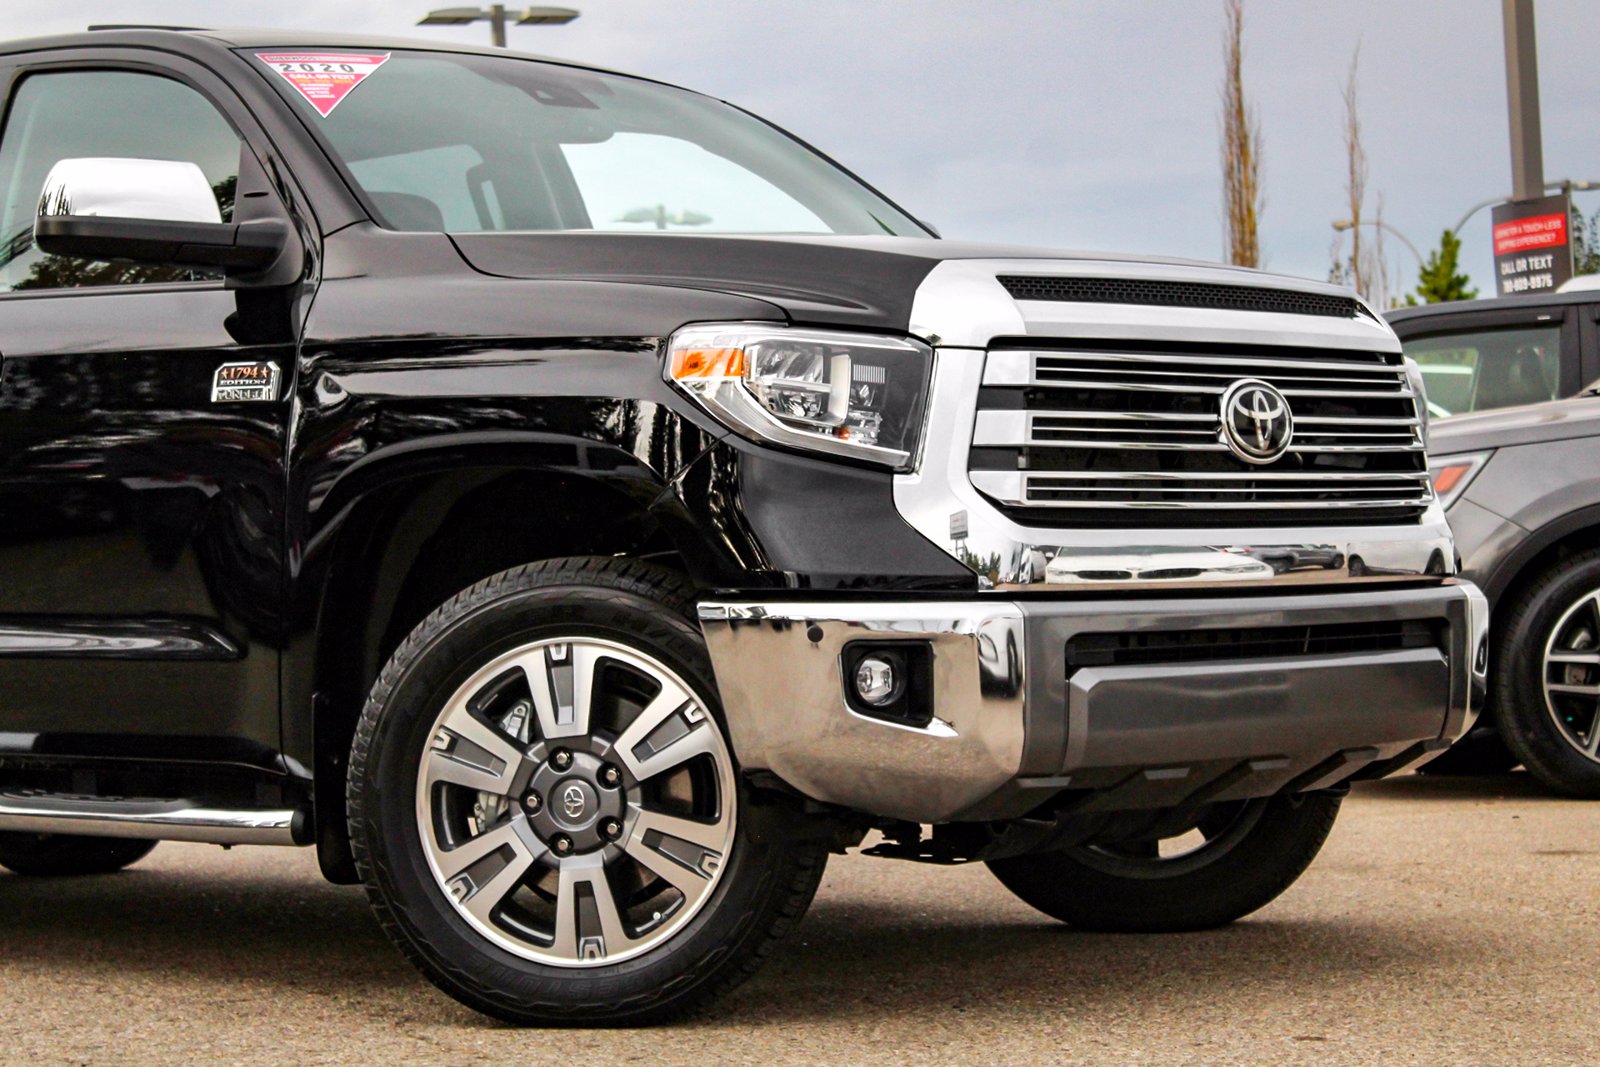 Certified Pre-Owned 2020 Toyota Tundra 1794 Edition 5.7L 4WD Crew Cab